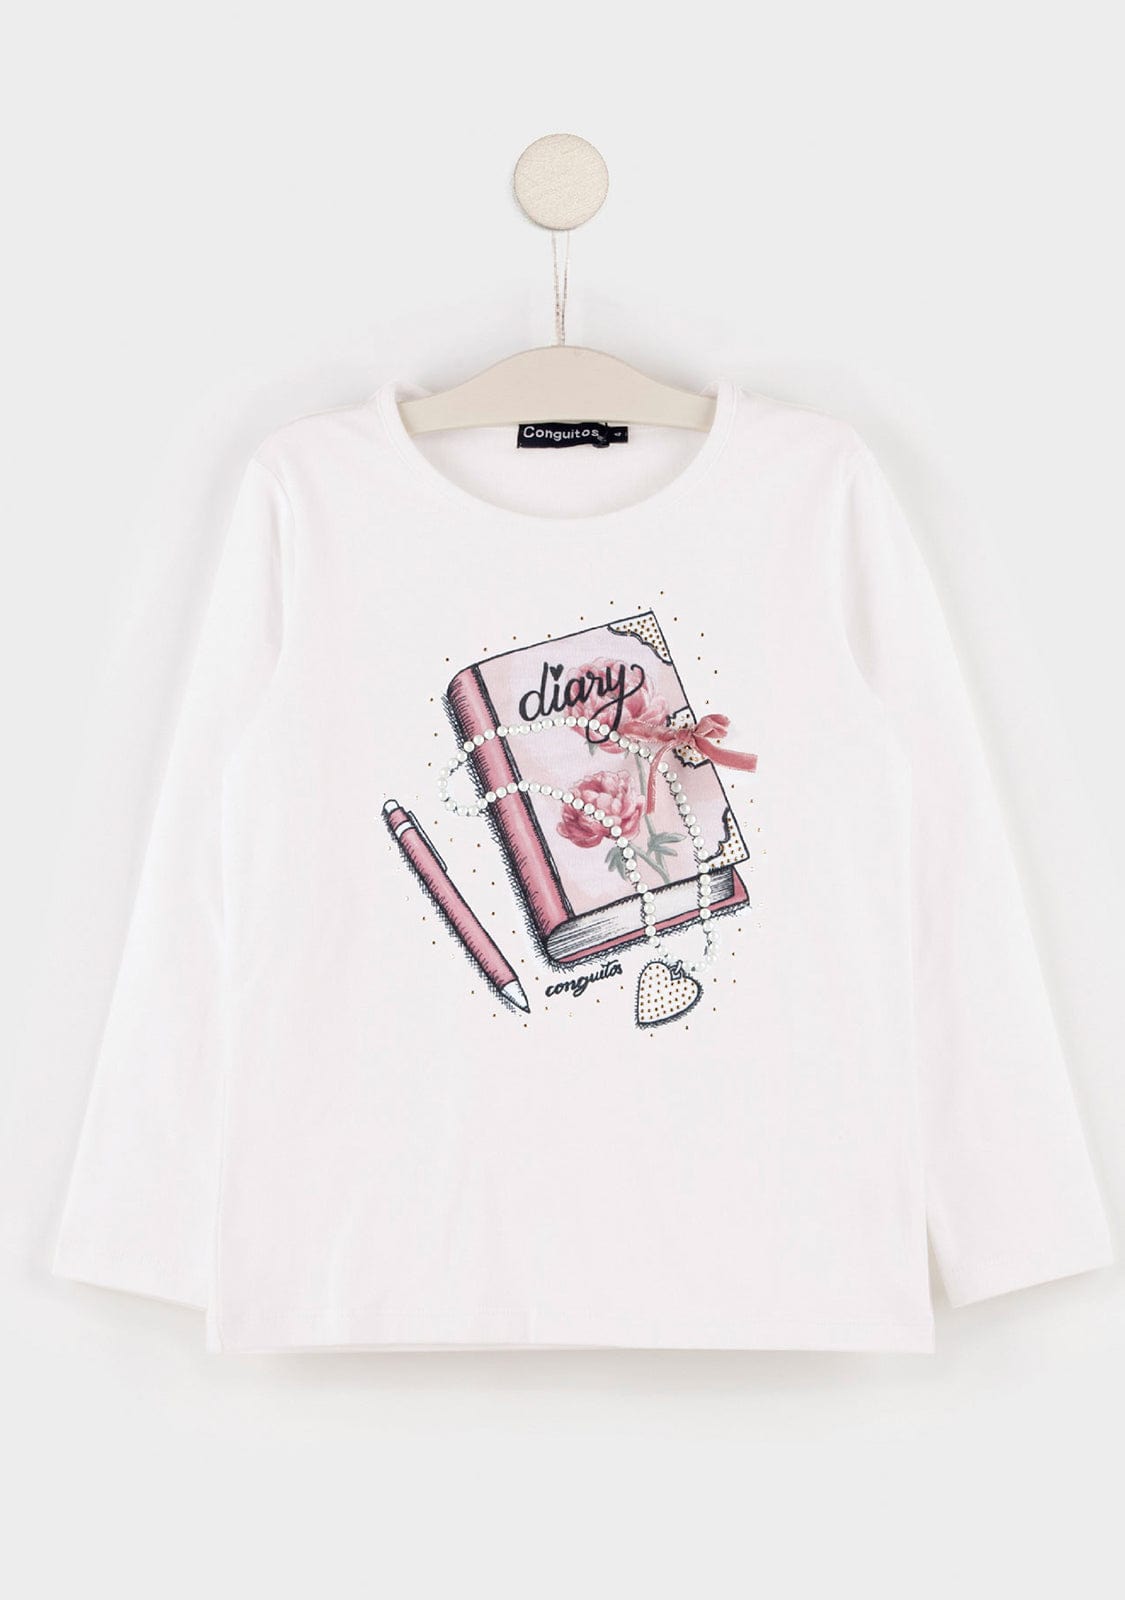 CONGUITOS TEXTIL Clothing Girl's "Diary" White T-shirt